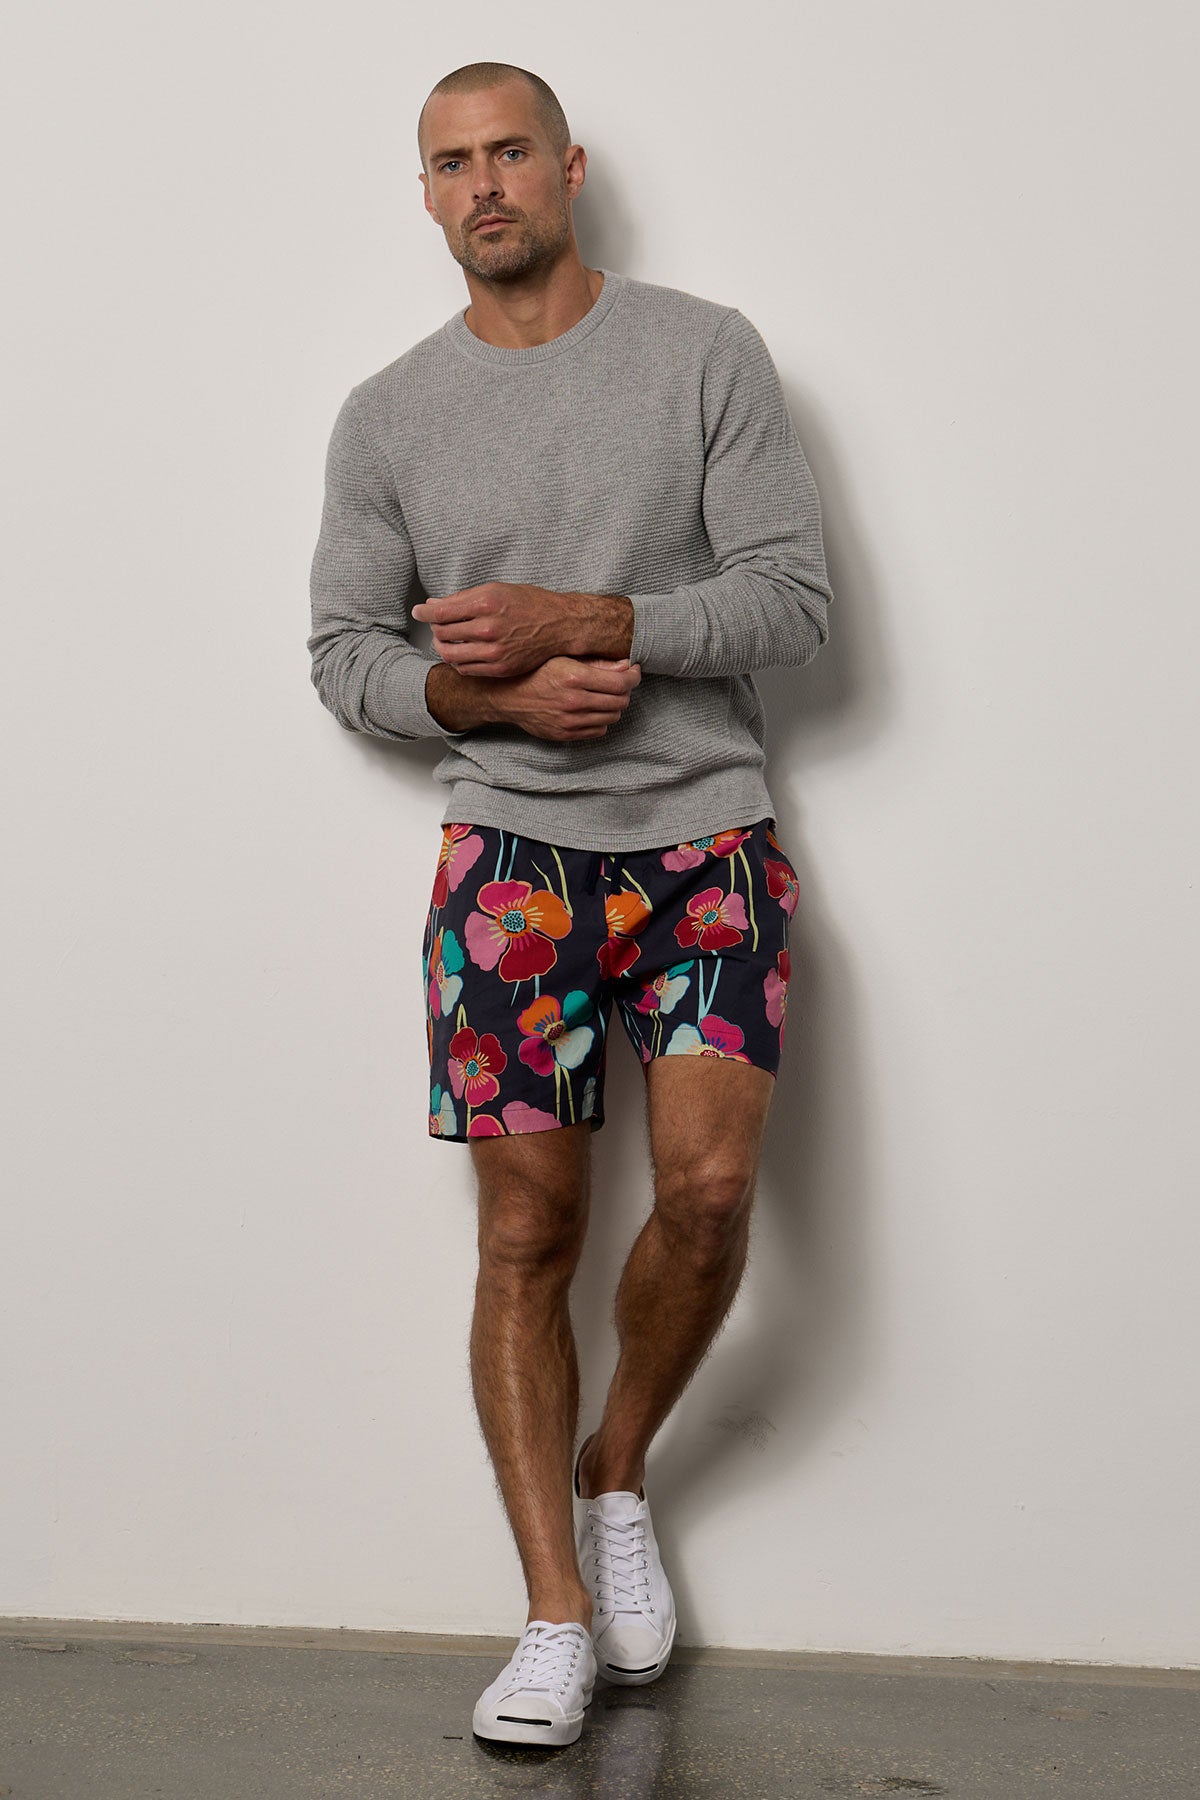 A man in Velvet by Graham & Spencer shorts and a grey sweatshirt is leaning against a wall, giving off a casual vacation look.-35678353490113